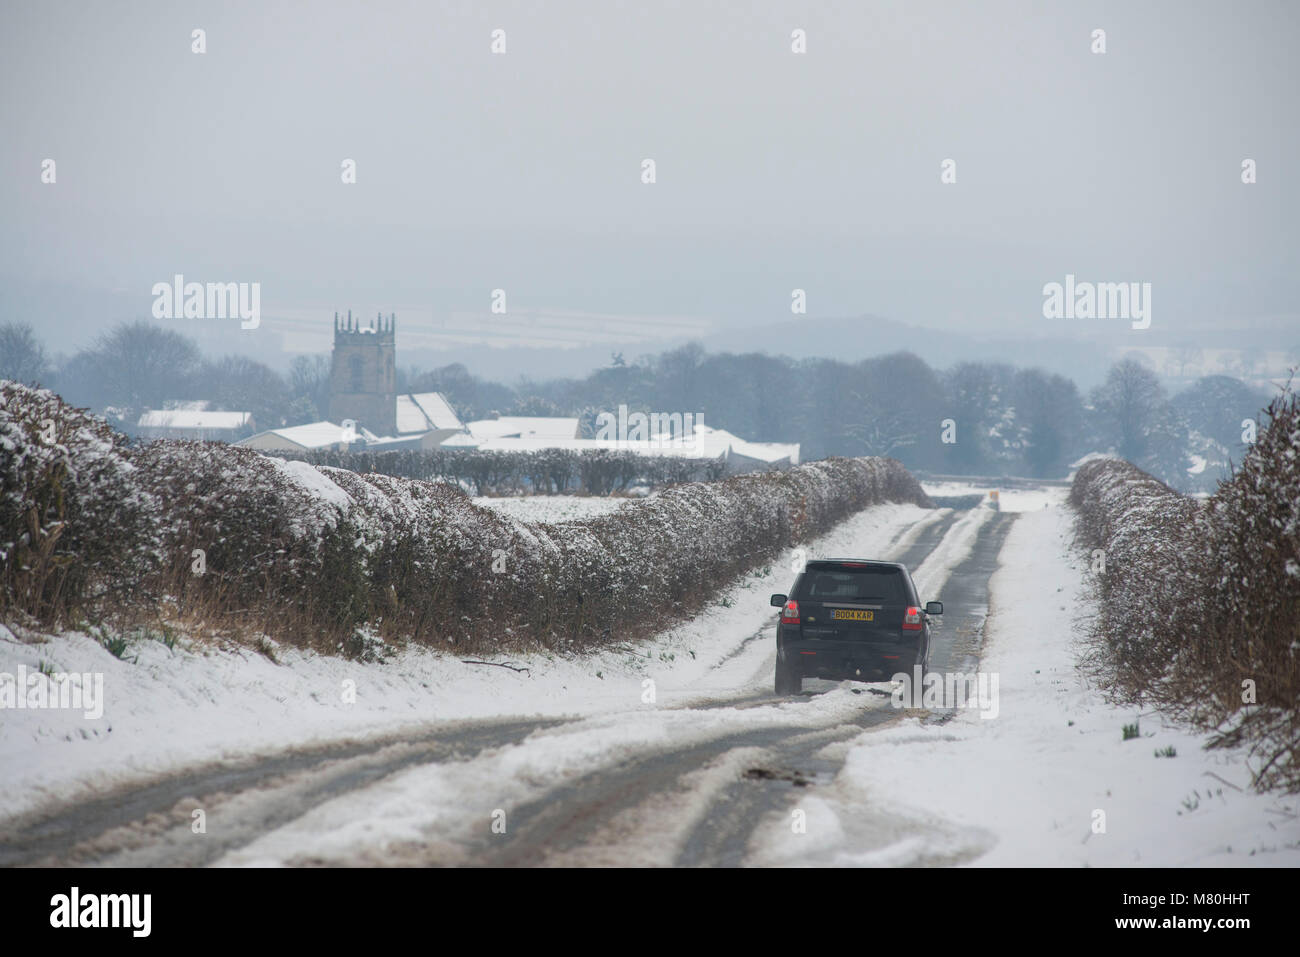 A 4x4 vehicle travels down a snow covered road at Woolley, West Yorkshire, UK. Stock Photo